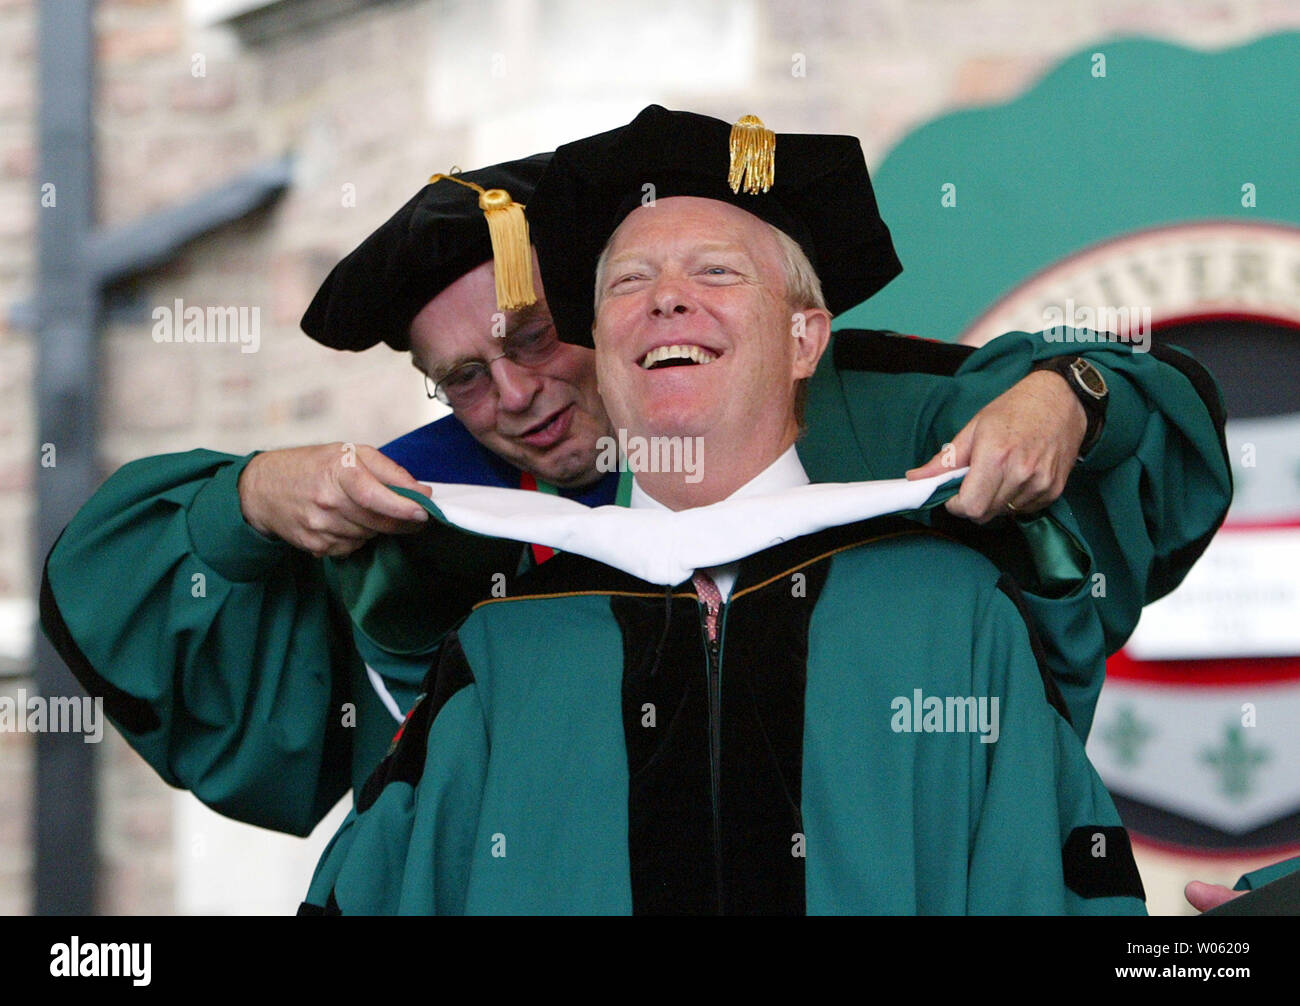 Former U.S. Rep. Richard Gephardt is hooded by Edward Wilson (L) commencement grand marshall during the Washington University graduation ceremonies in St. Louis on May 20, 2005. Gephardt was presented with the Honorary Degree of Doctor of Humane Letters. Washington University is also home of the new Richard A. Gephardt Institute for Public Service. (UPI Photo/Bill Greenblatt) Stock Photo